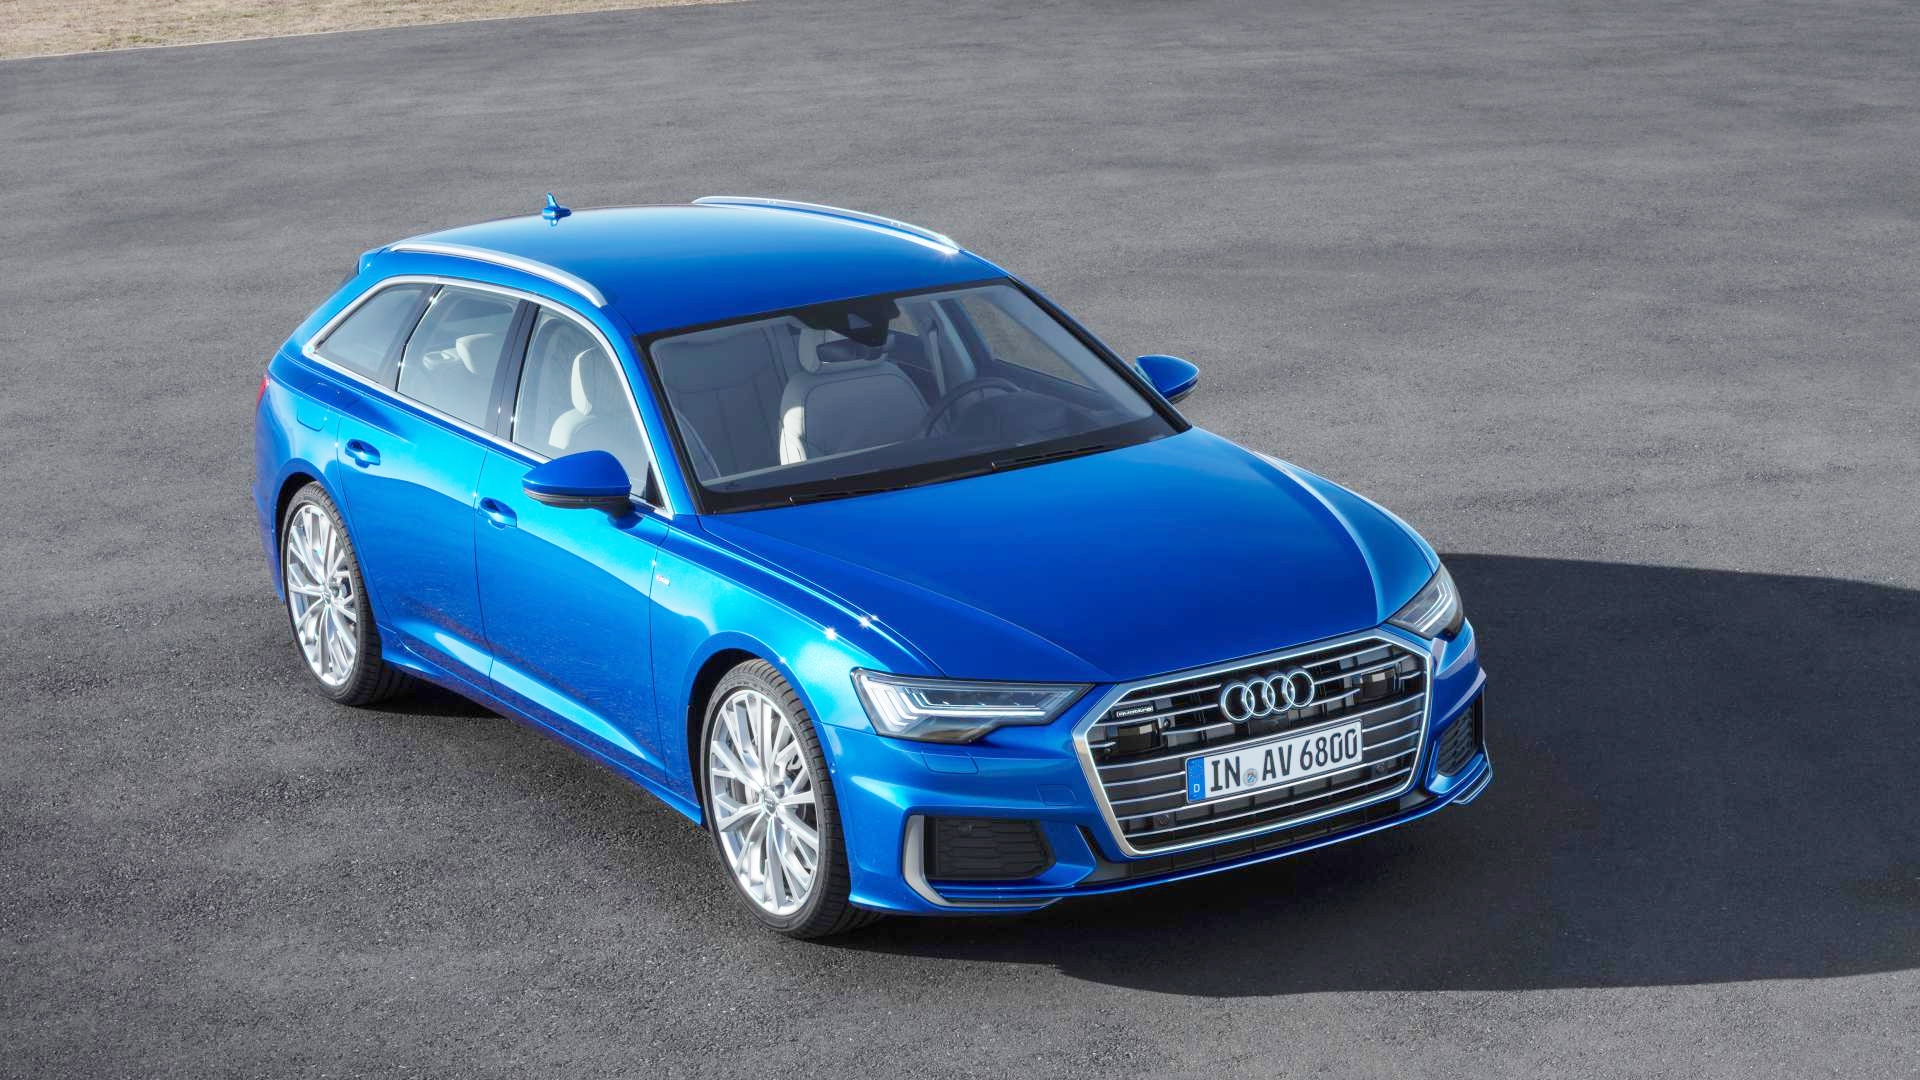 Audi-A6-Avant-2019-dep-hon-voi-gia-1-4-ty-dong-anh-1